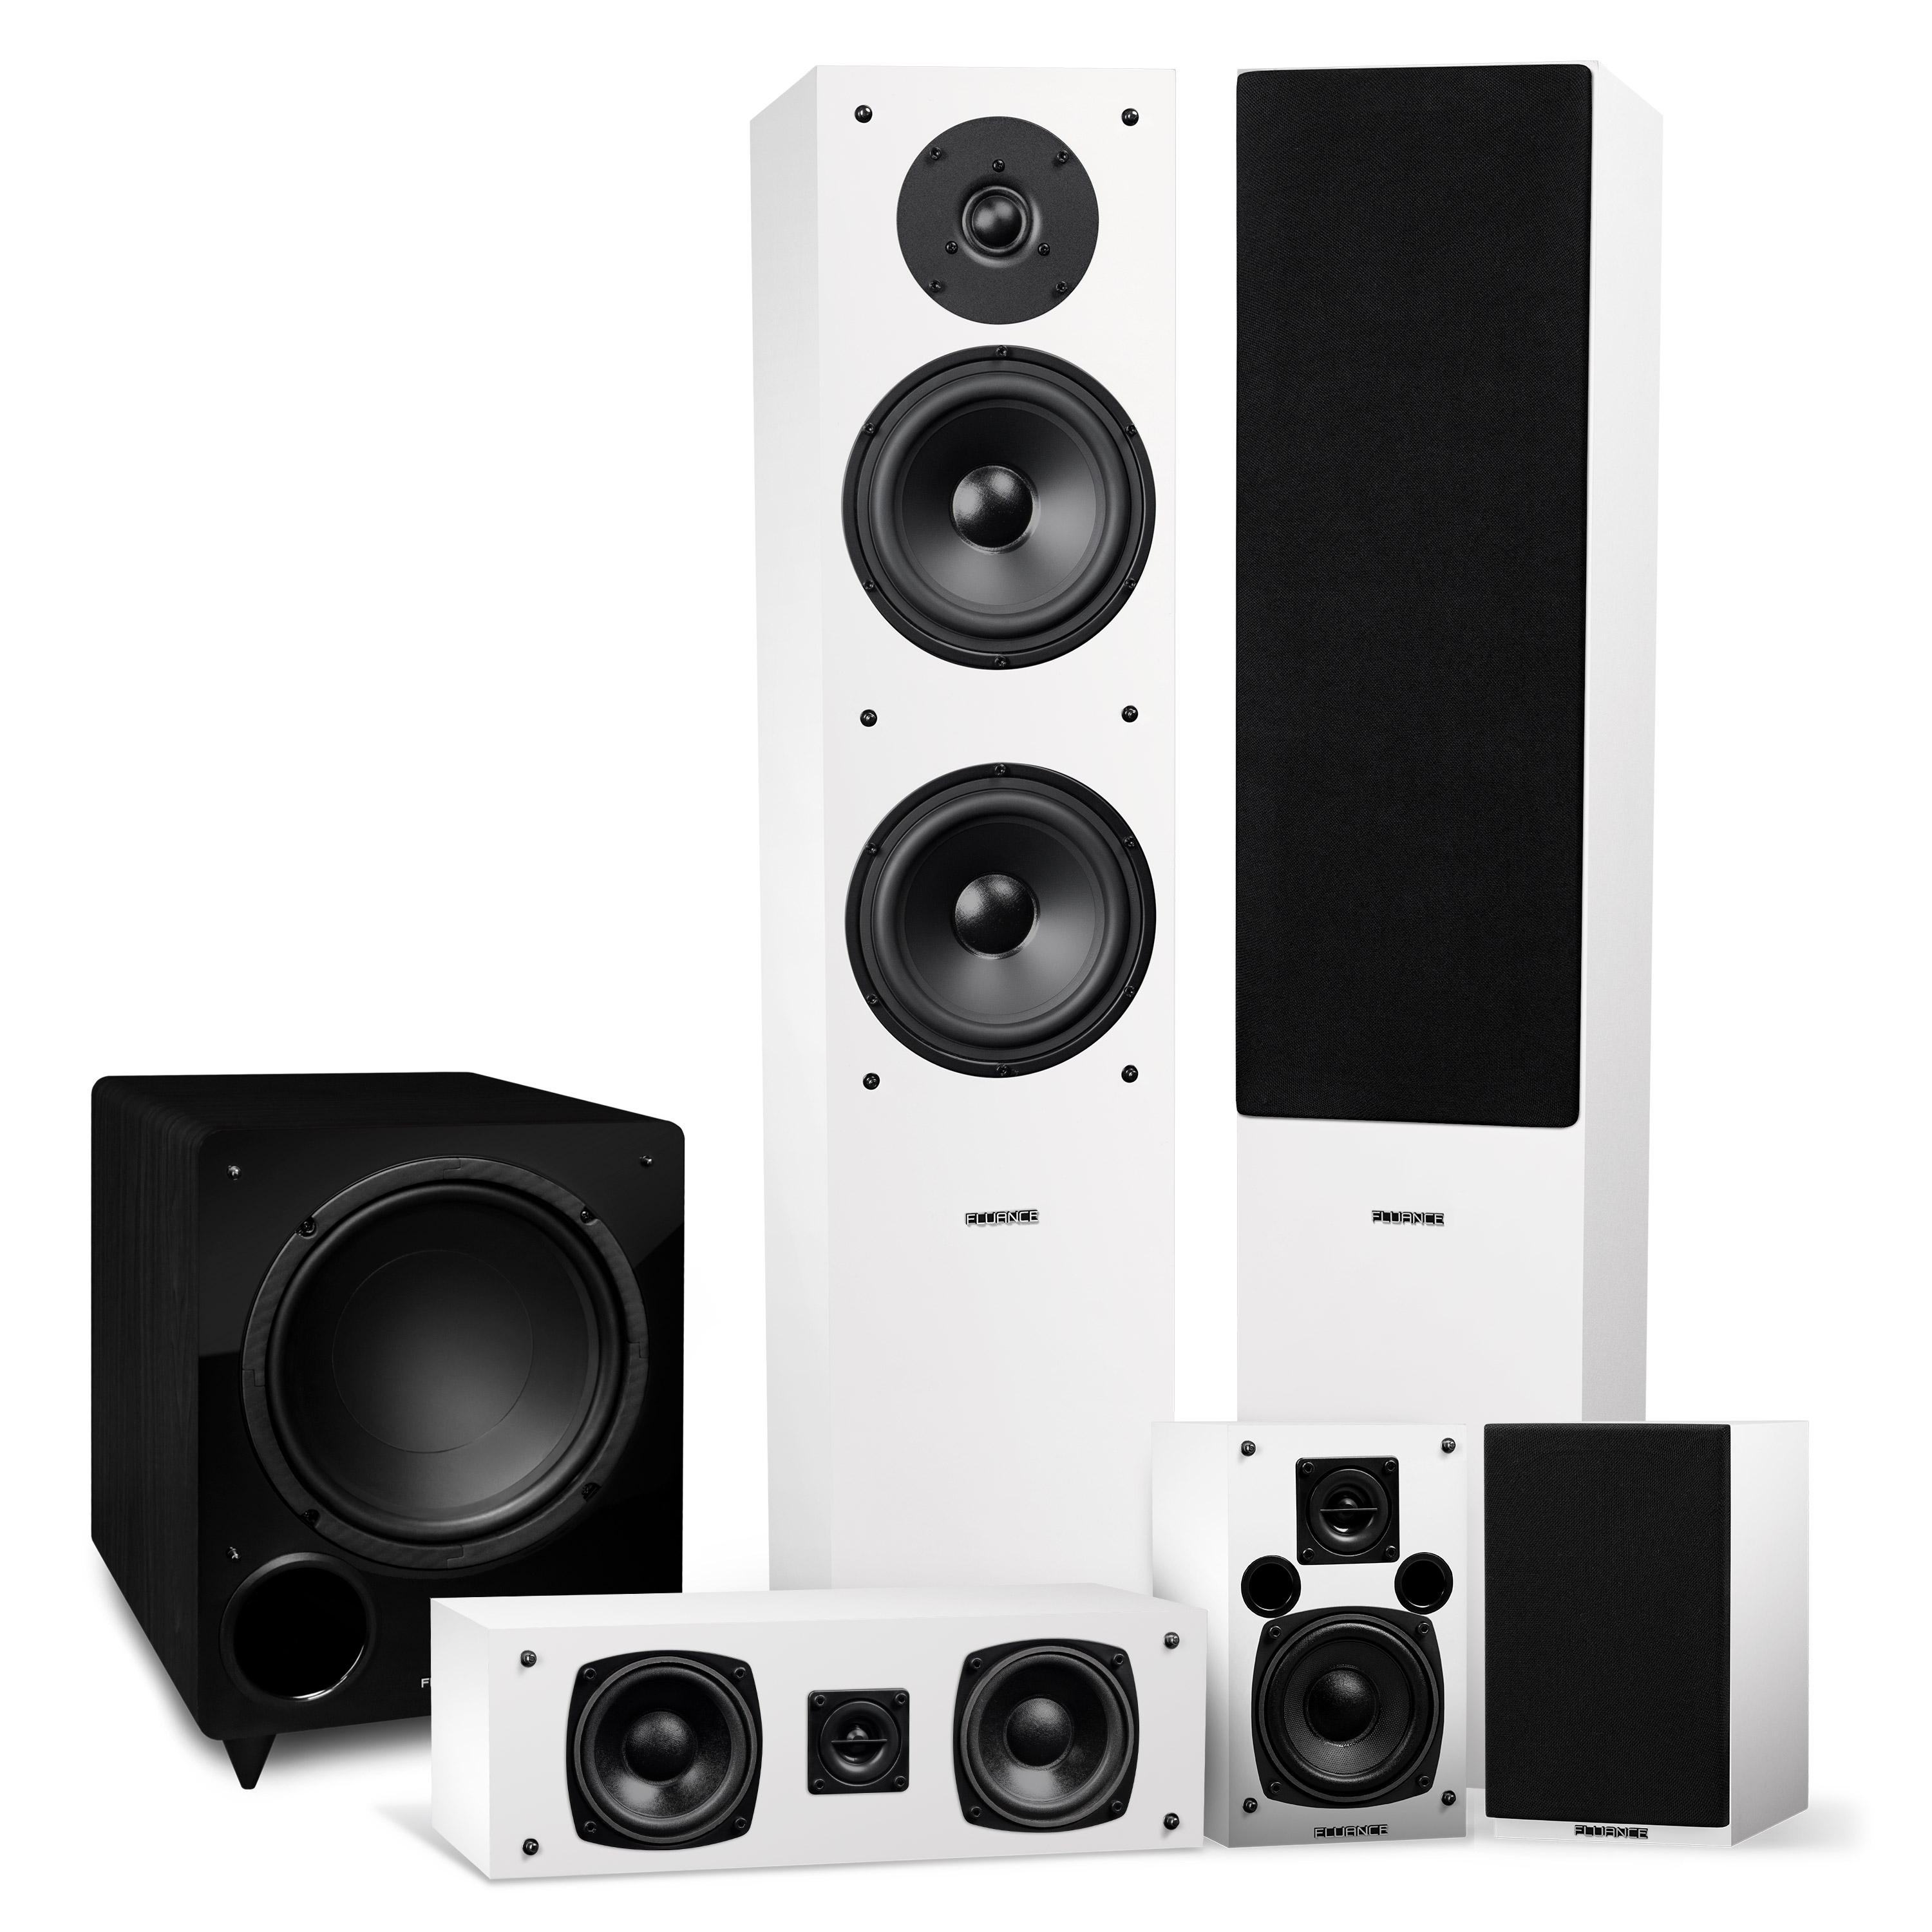 Fluance Elite High Definition Surround Sound Home Theater 5.1 Channel  Speaker System including 3-Way Floorstanding Towers, Center Channel, Rear  Surround Speakers and DB10 Subwoofer White (SX51WHR) Walmart Canada